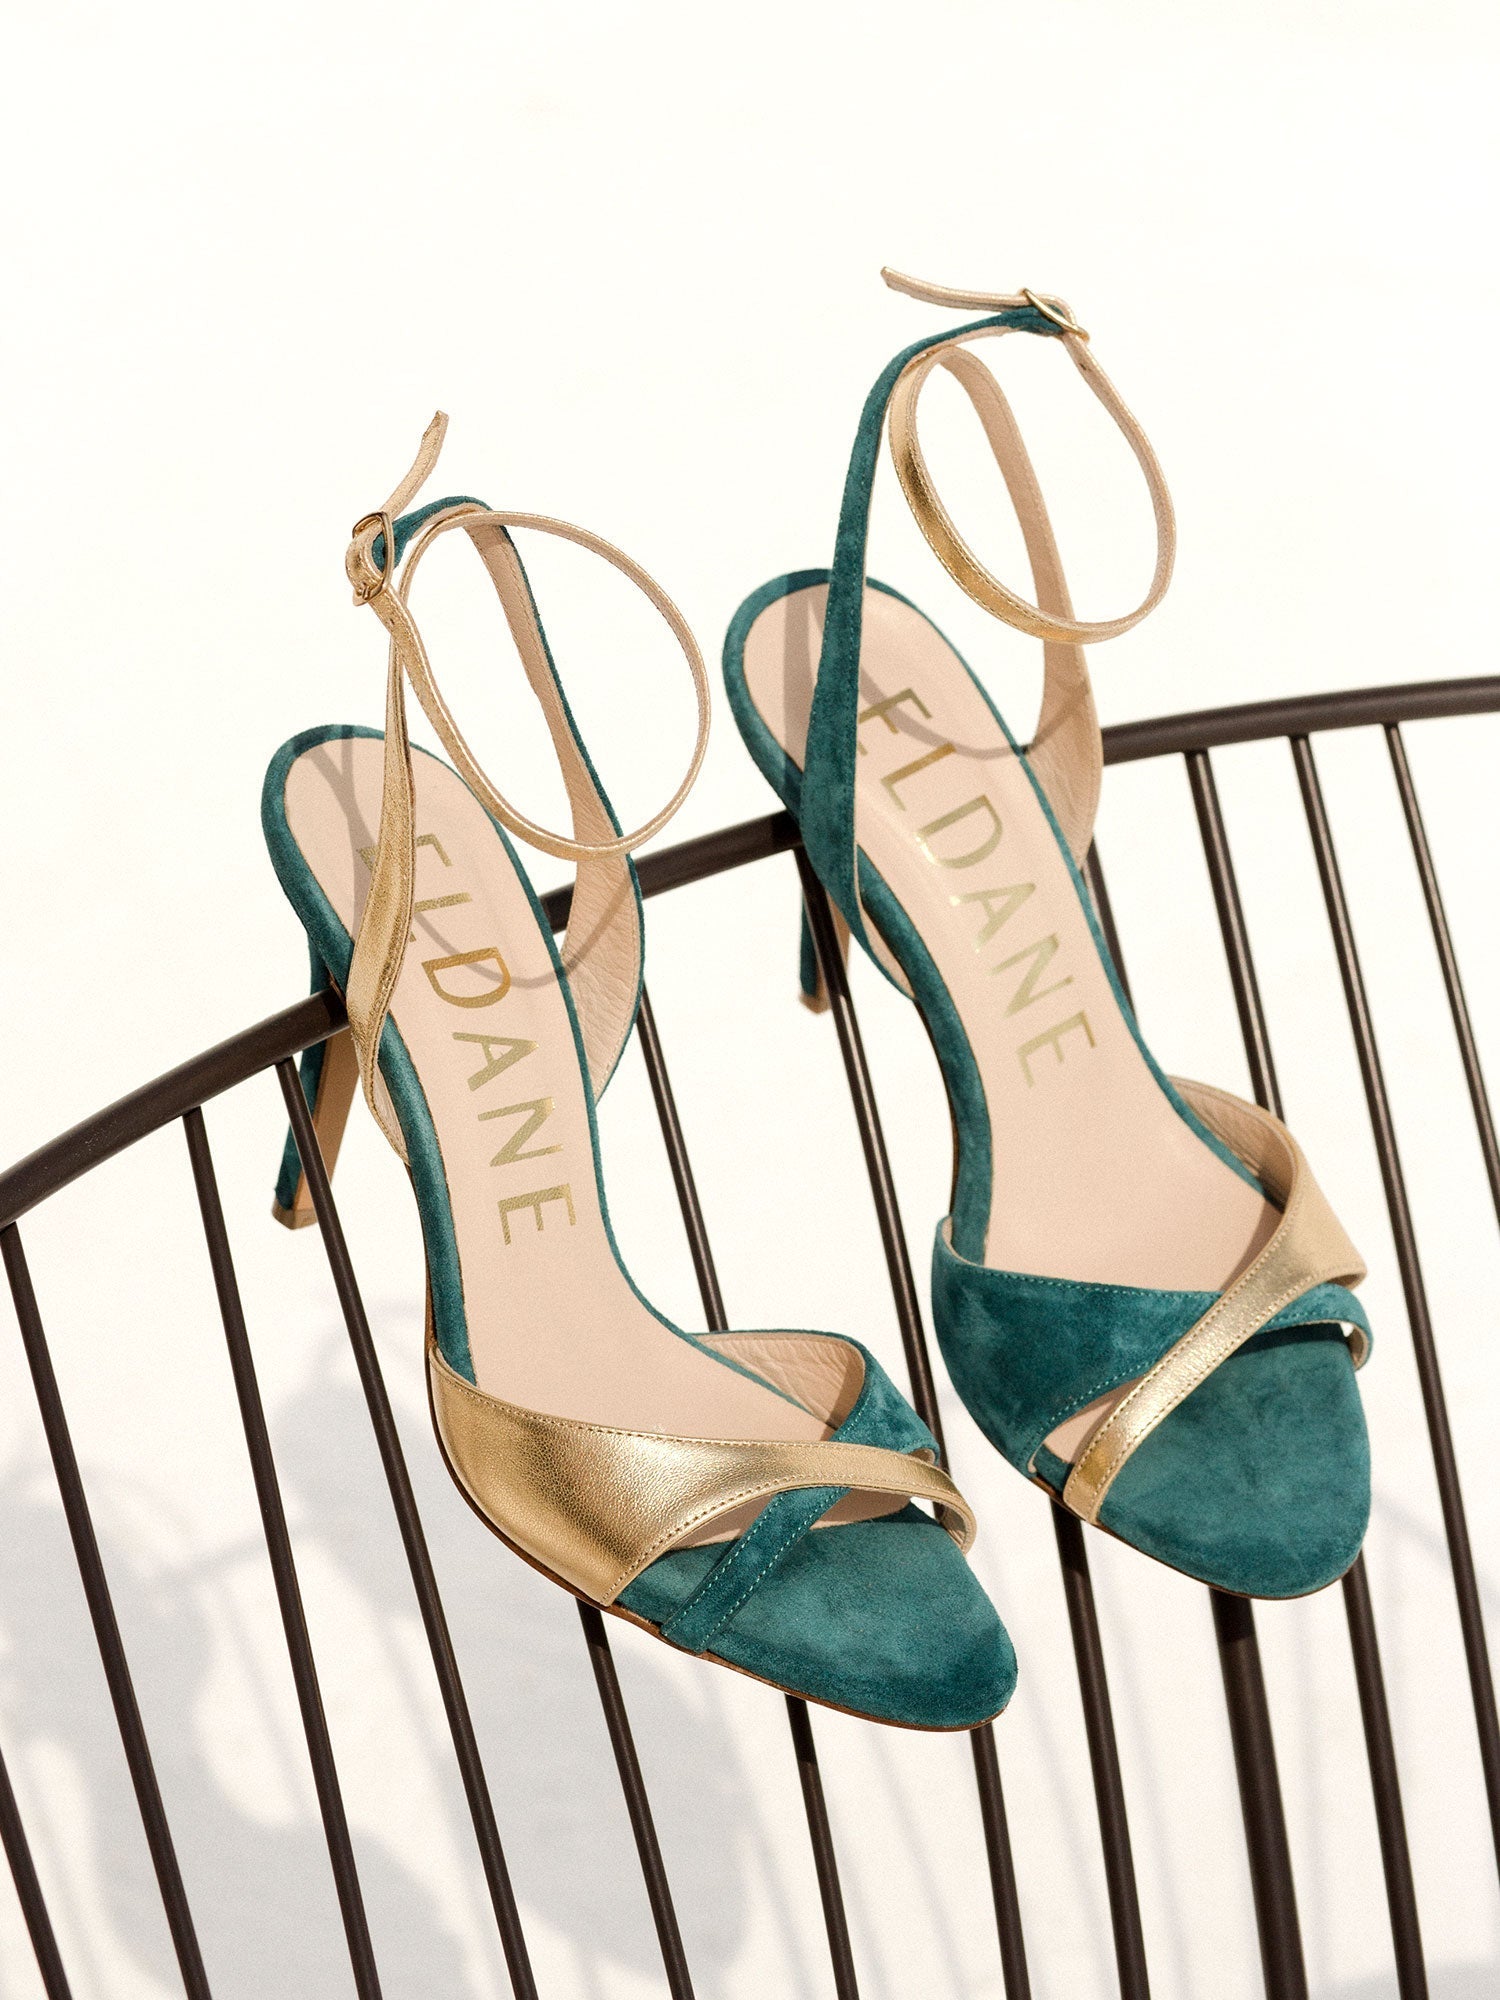 Heeled leather sandals in petrol and gold